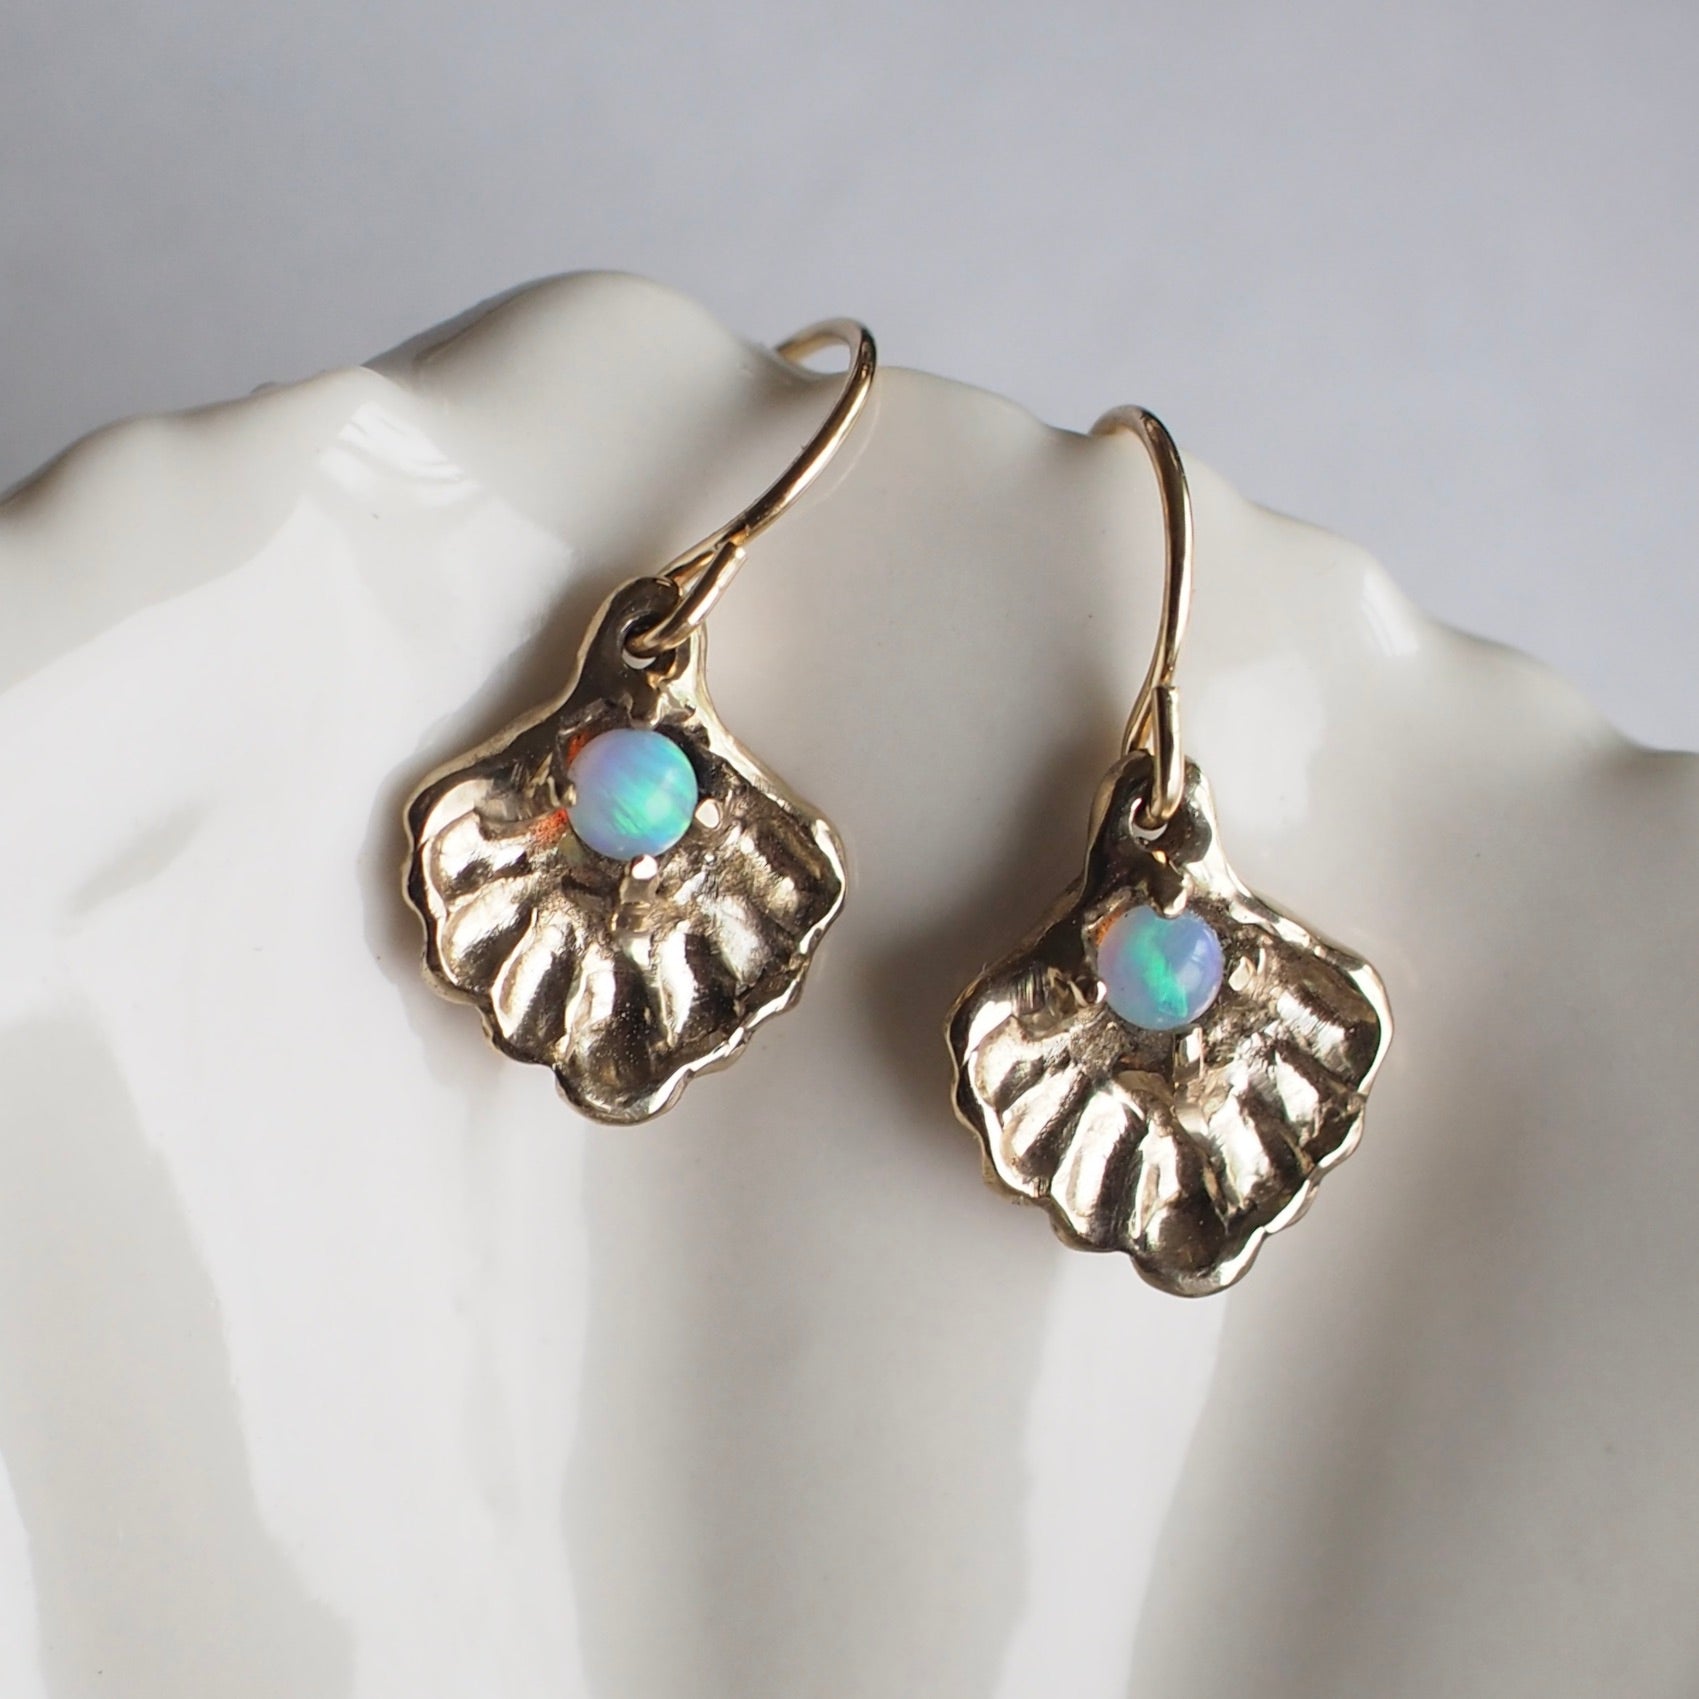 Oyster shell earrings containing a small opal "pearl", cast in gold tone bronze by Iron Oxide Designs